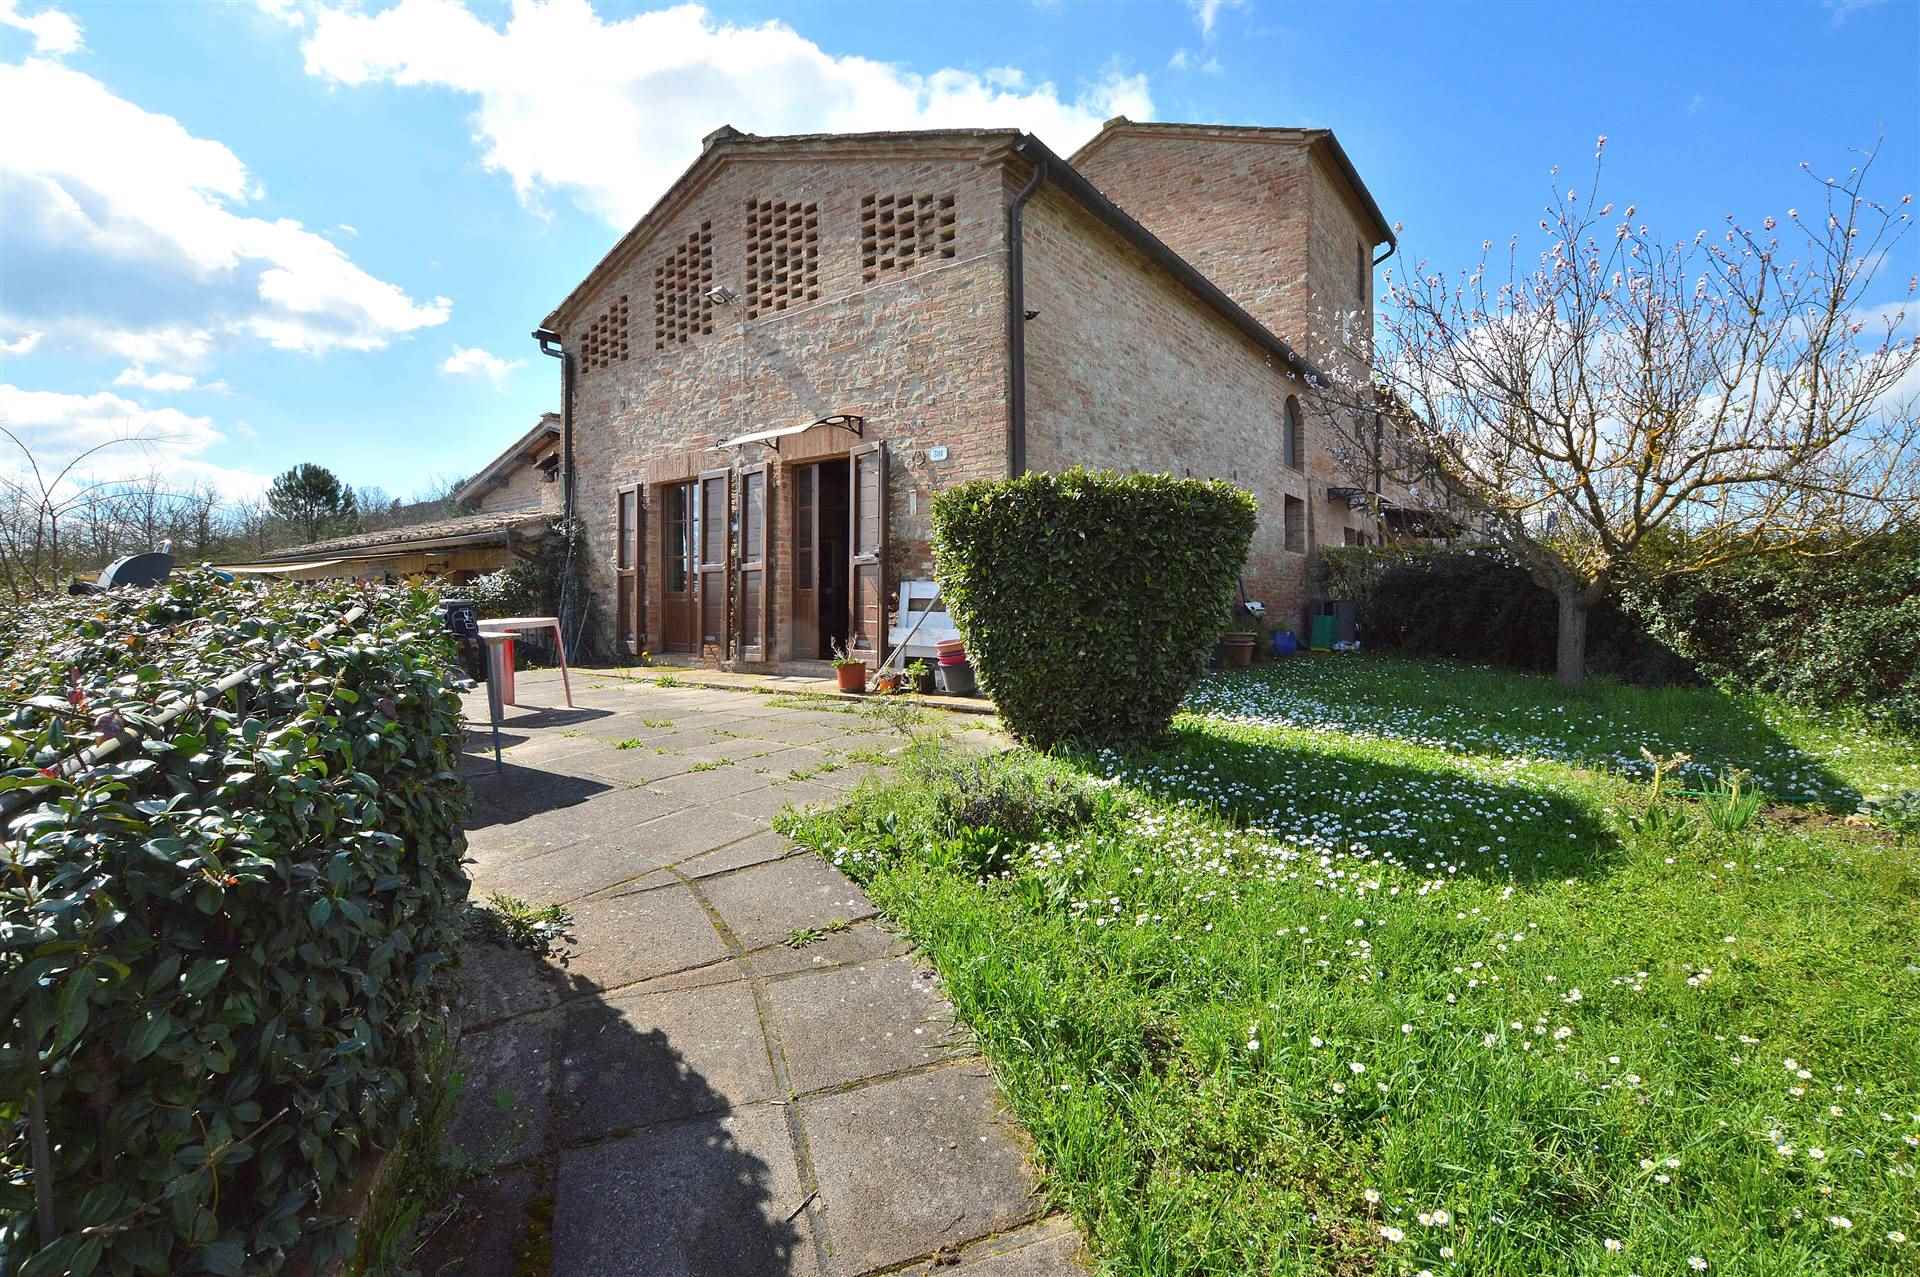 MONTERONI D'ARBIA, Apartment for sale of 108 Sq. mt., Excellent Condition, Heating Individual heating system, Energetic class: G, Epi: 175 kwh/m2 